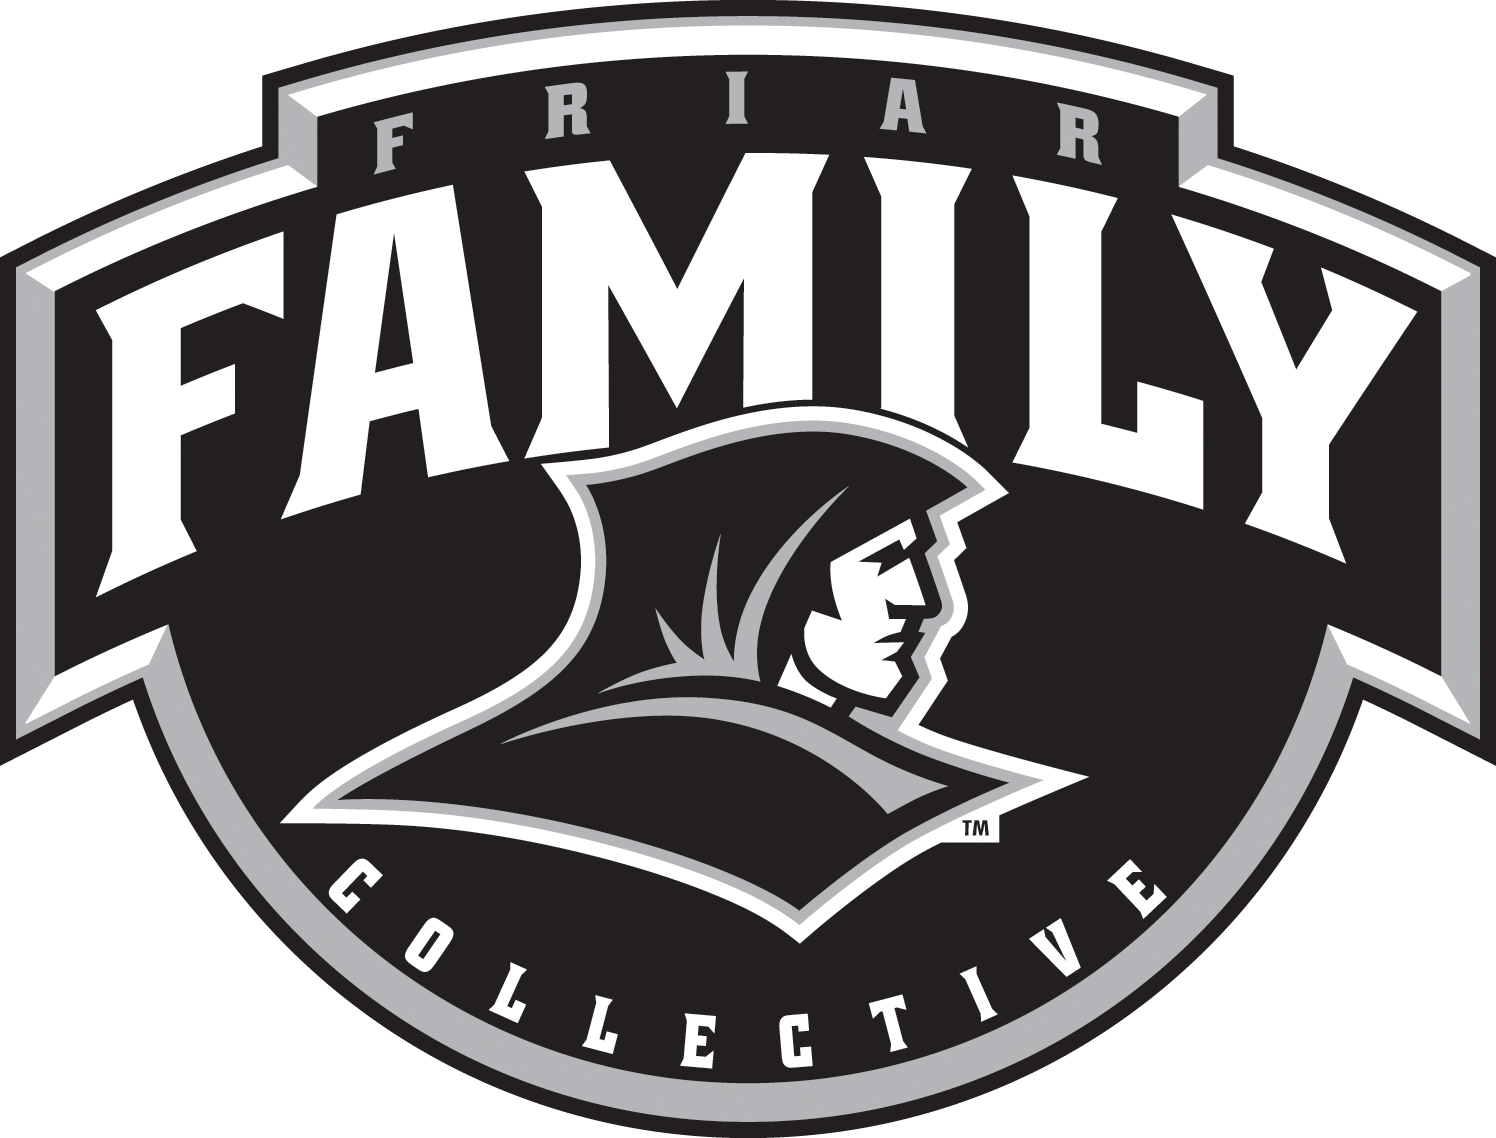 Support Your Friar Student Athletes! footer logo